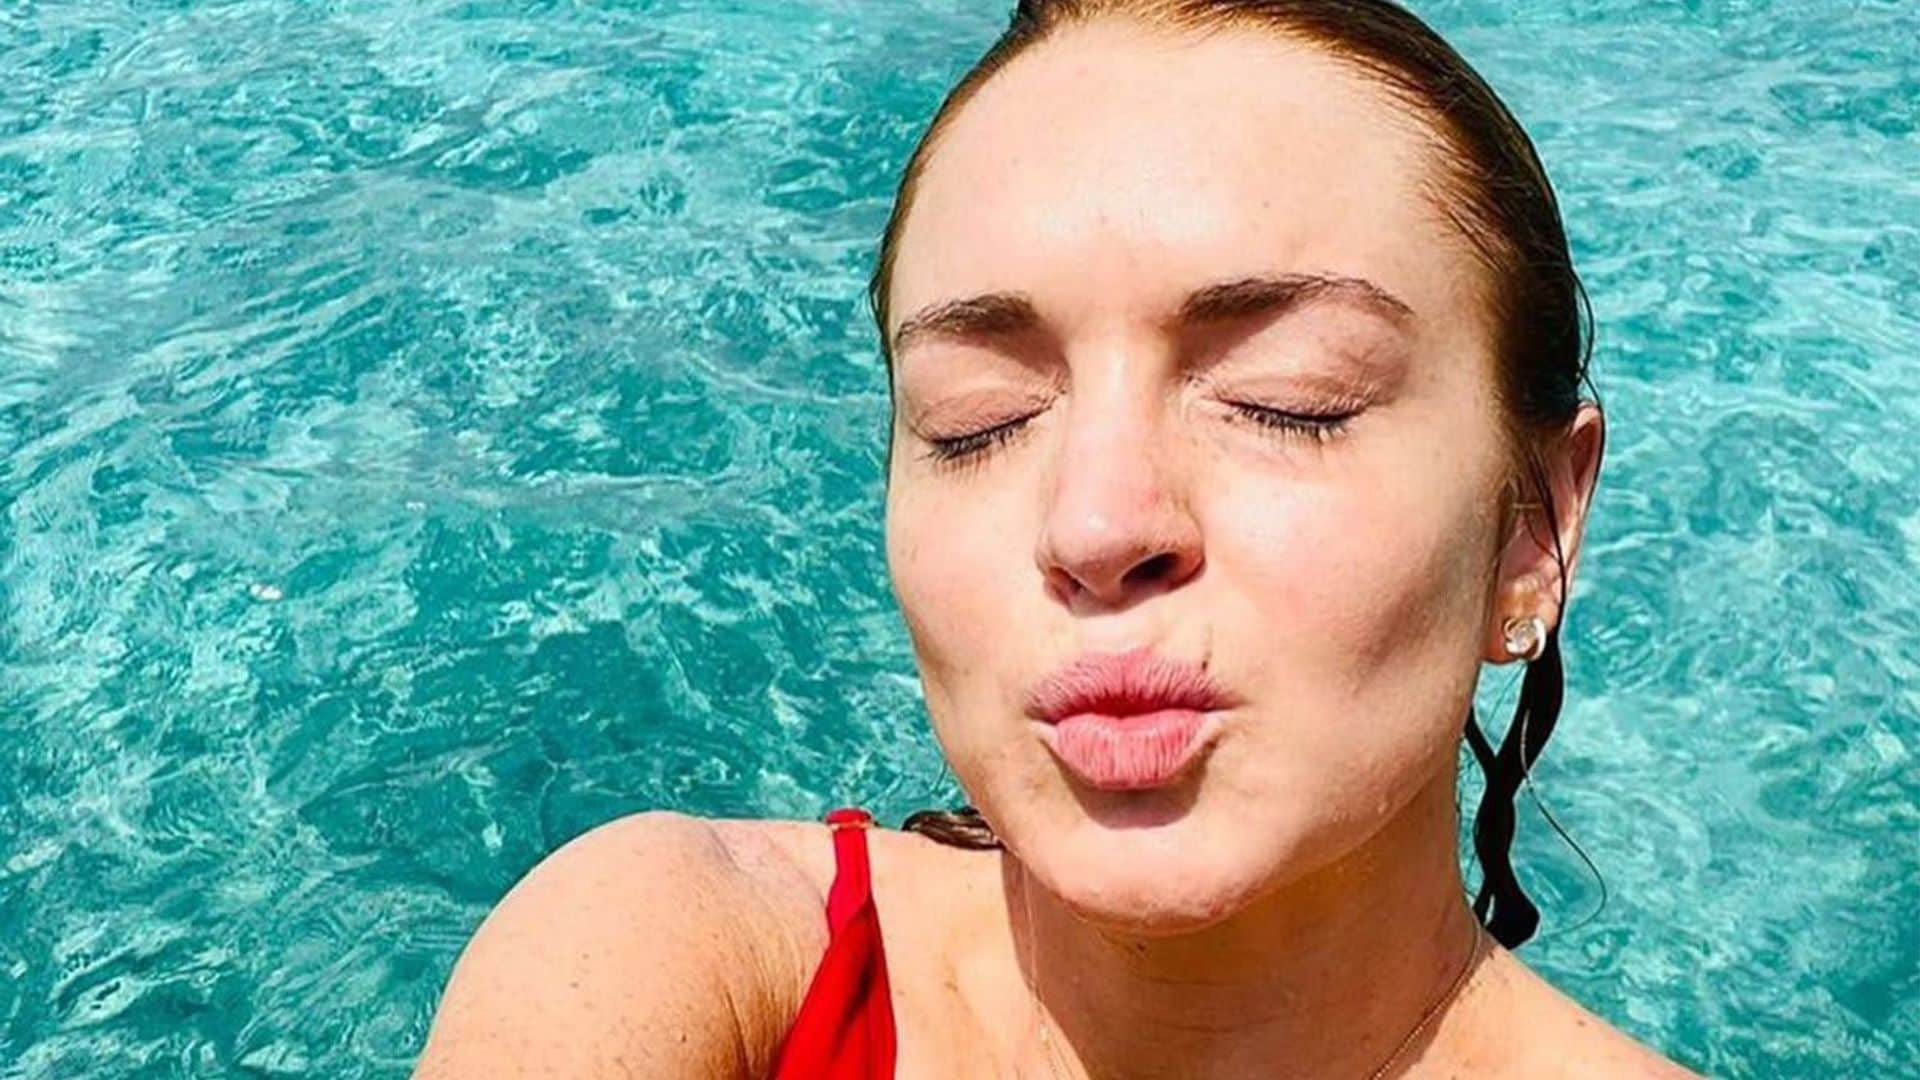 Lindsay Lohan bares it all during a trip to the Maldives